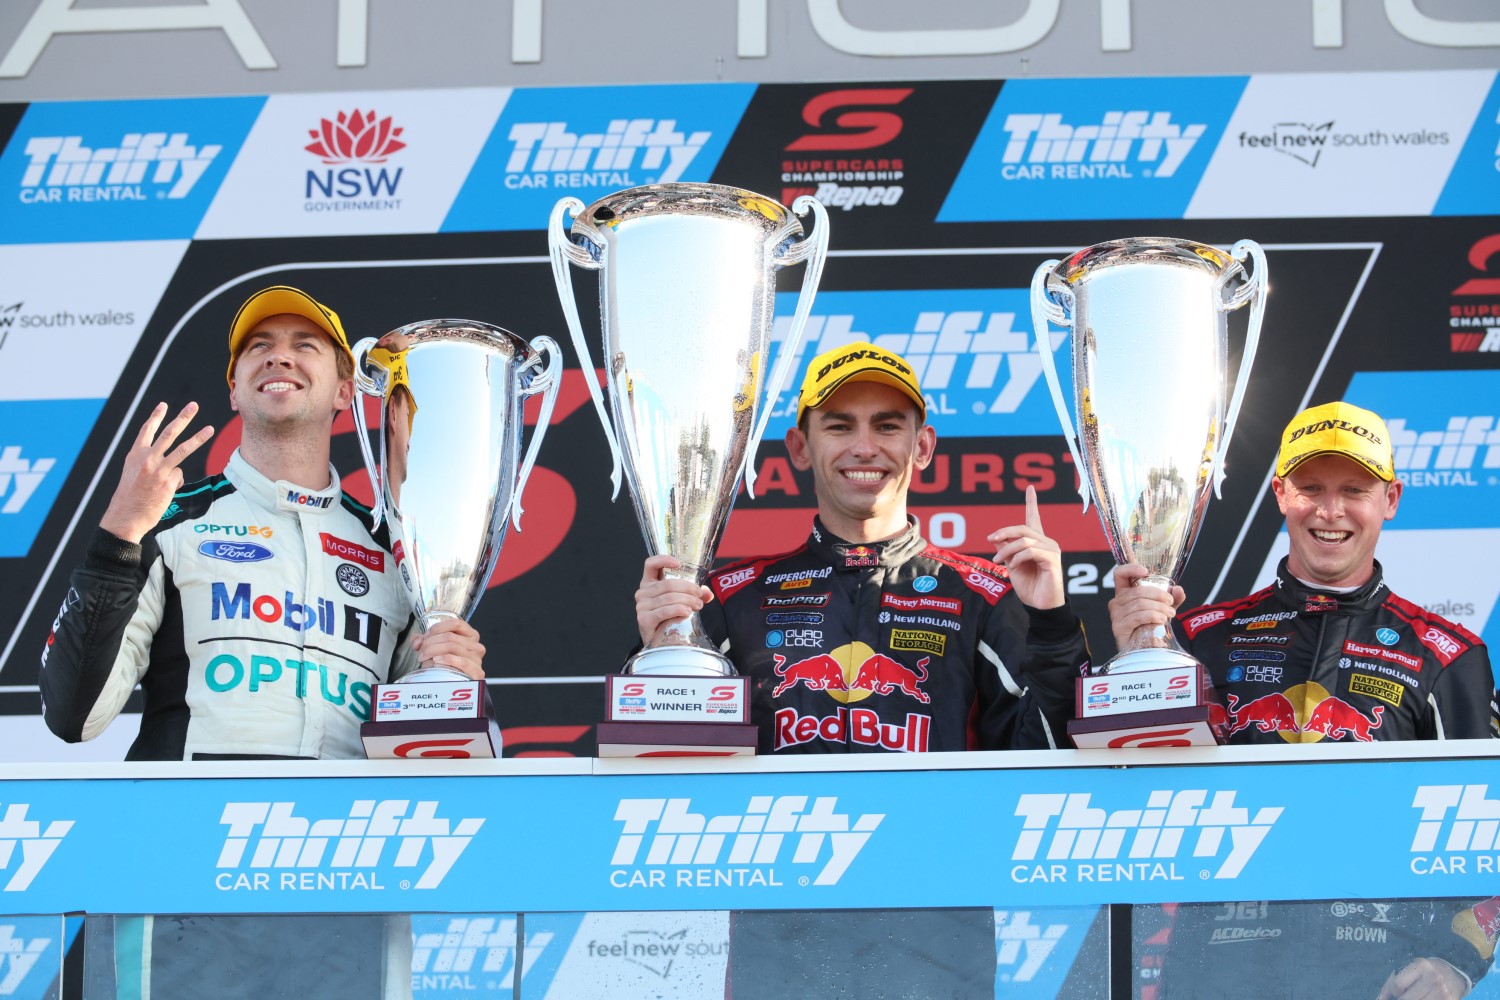 Bathhurst 500 Podium Race 1 (L to R) Chaz Mostert, Broc Feeney and Will Brown